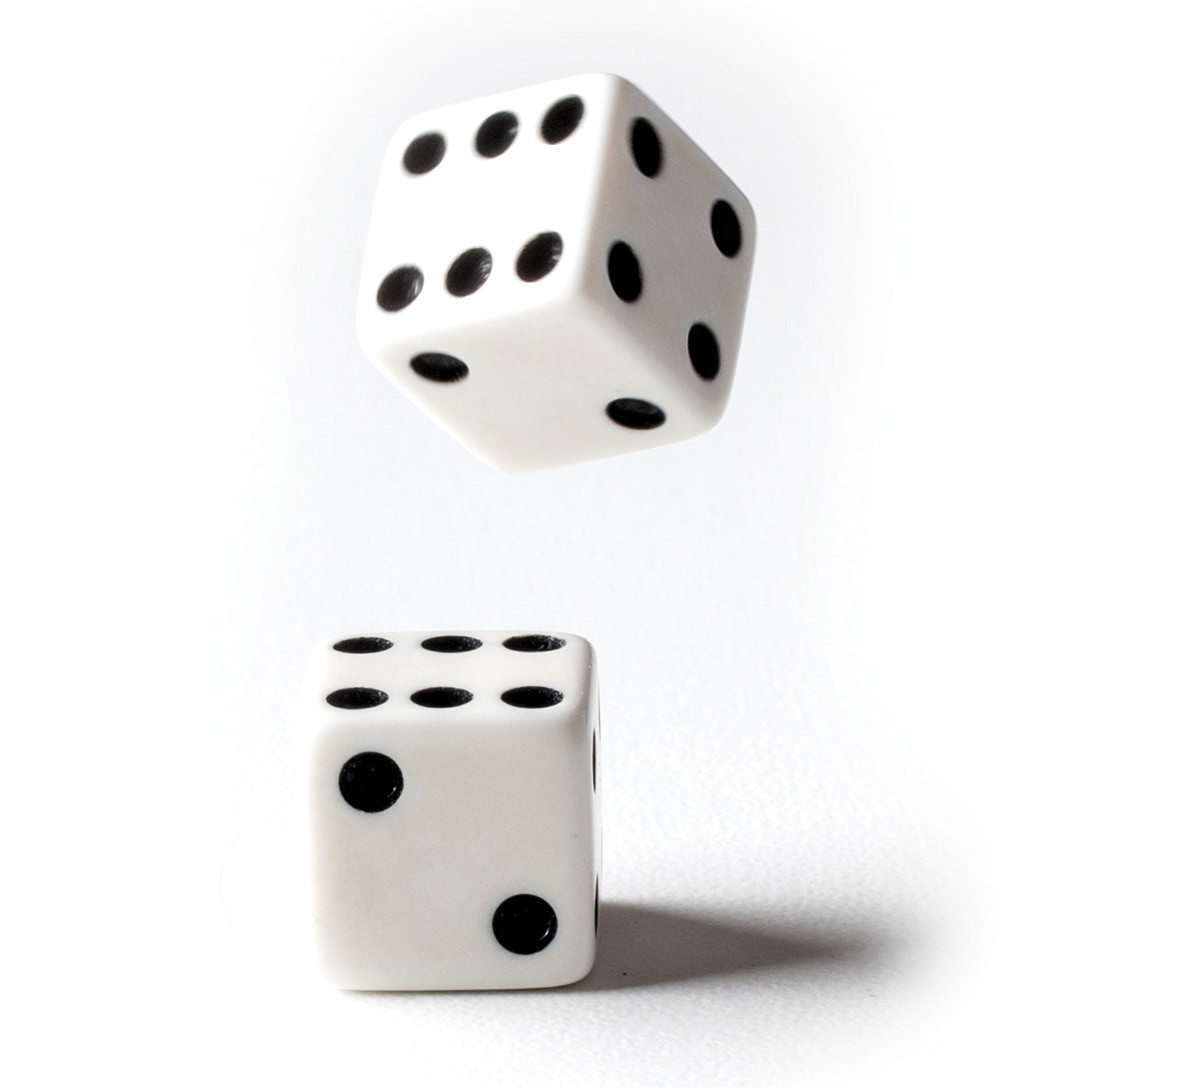 A pair of dice falling from above 